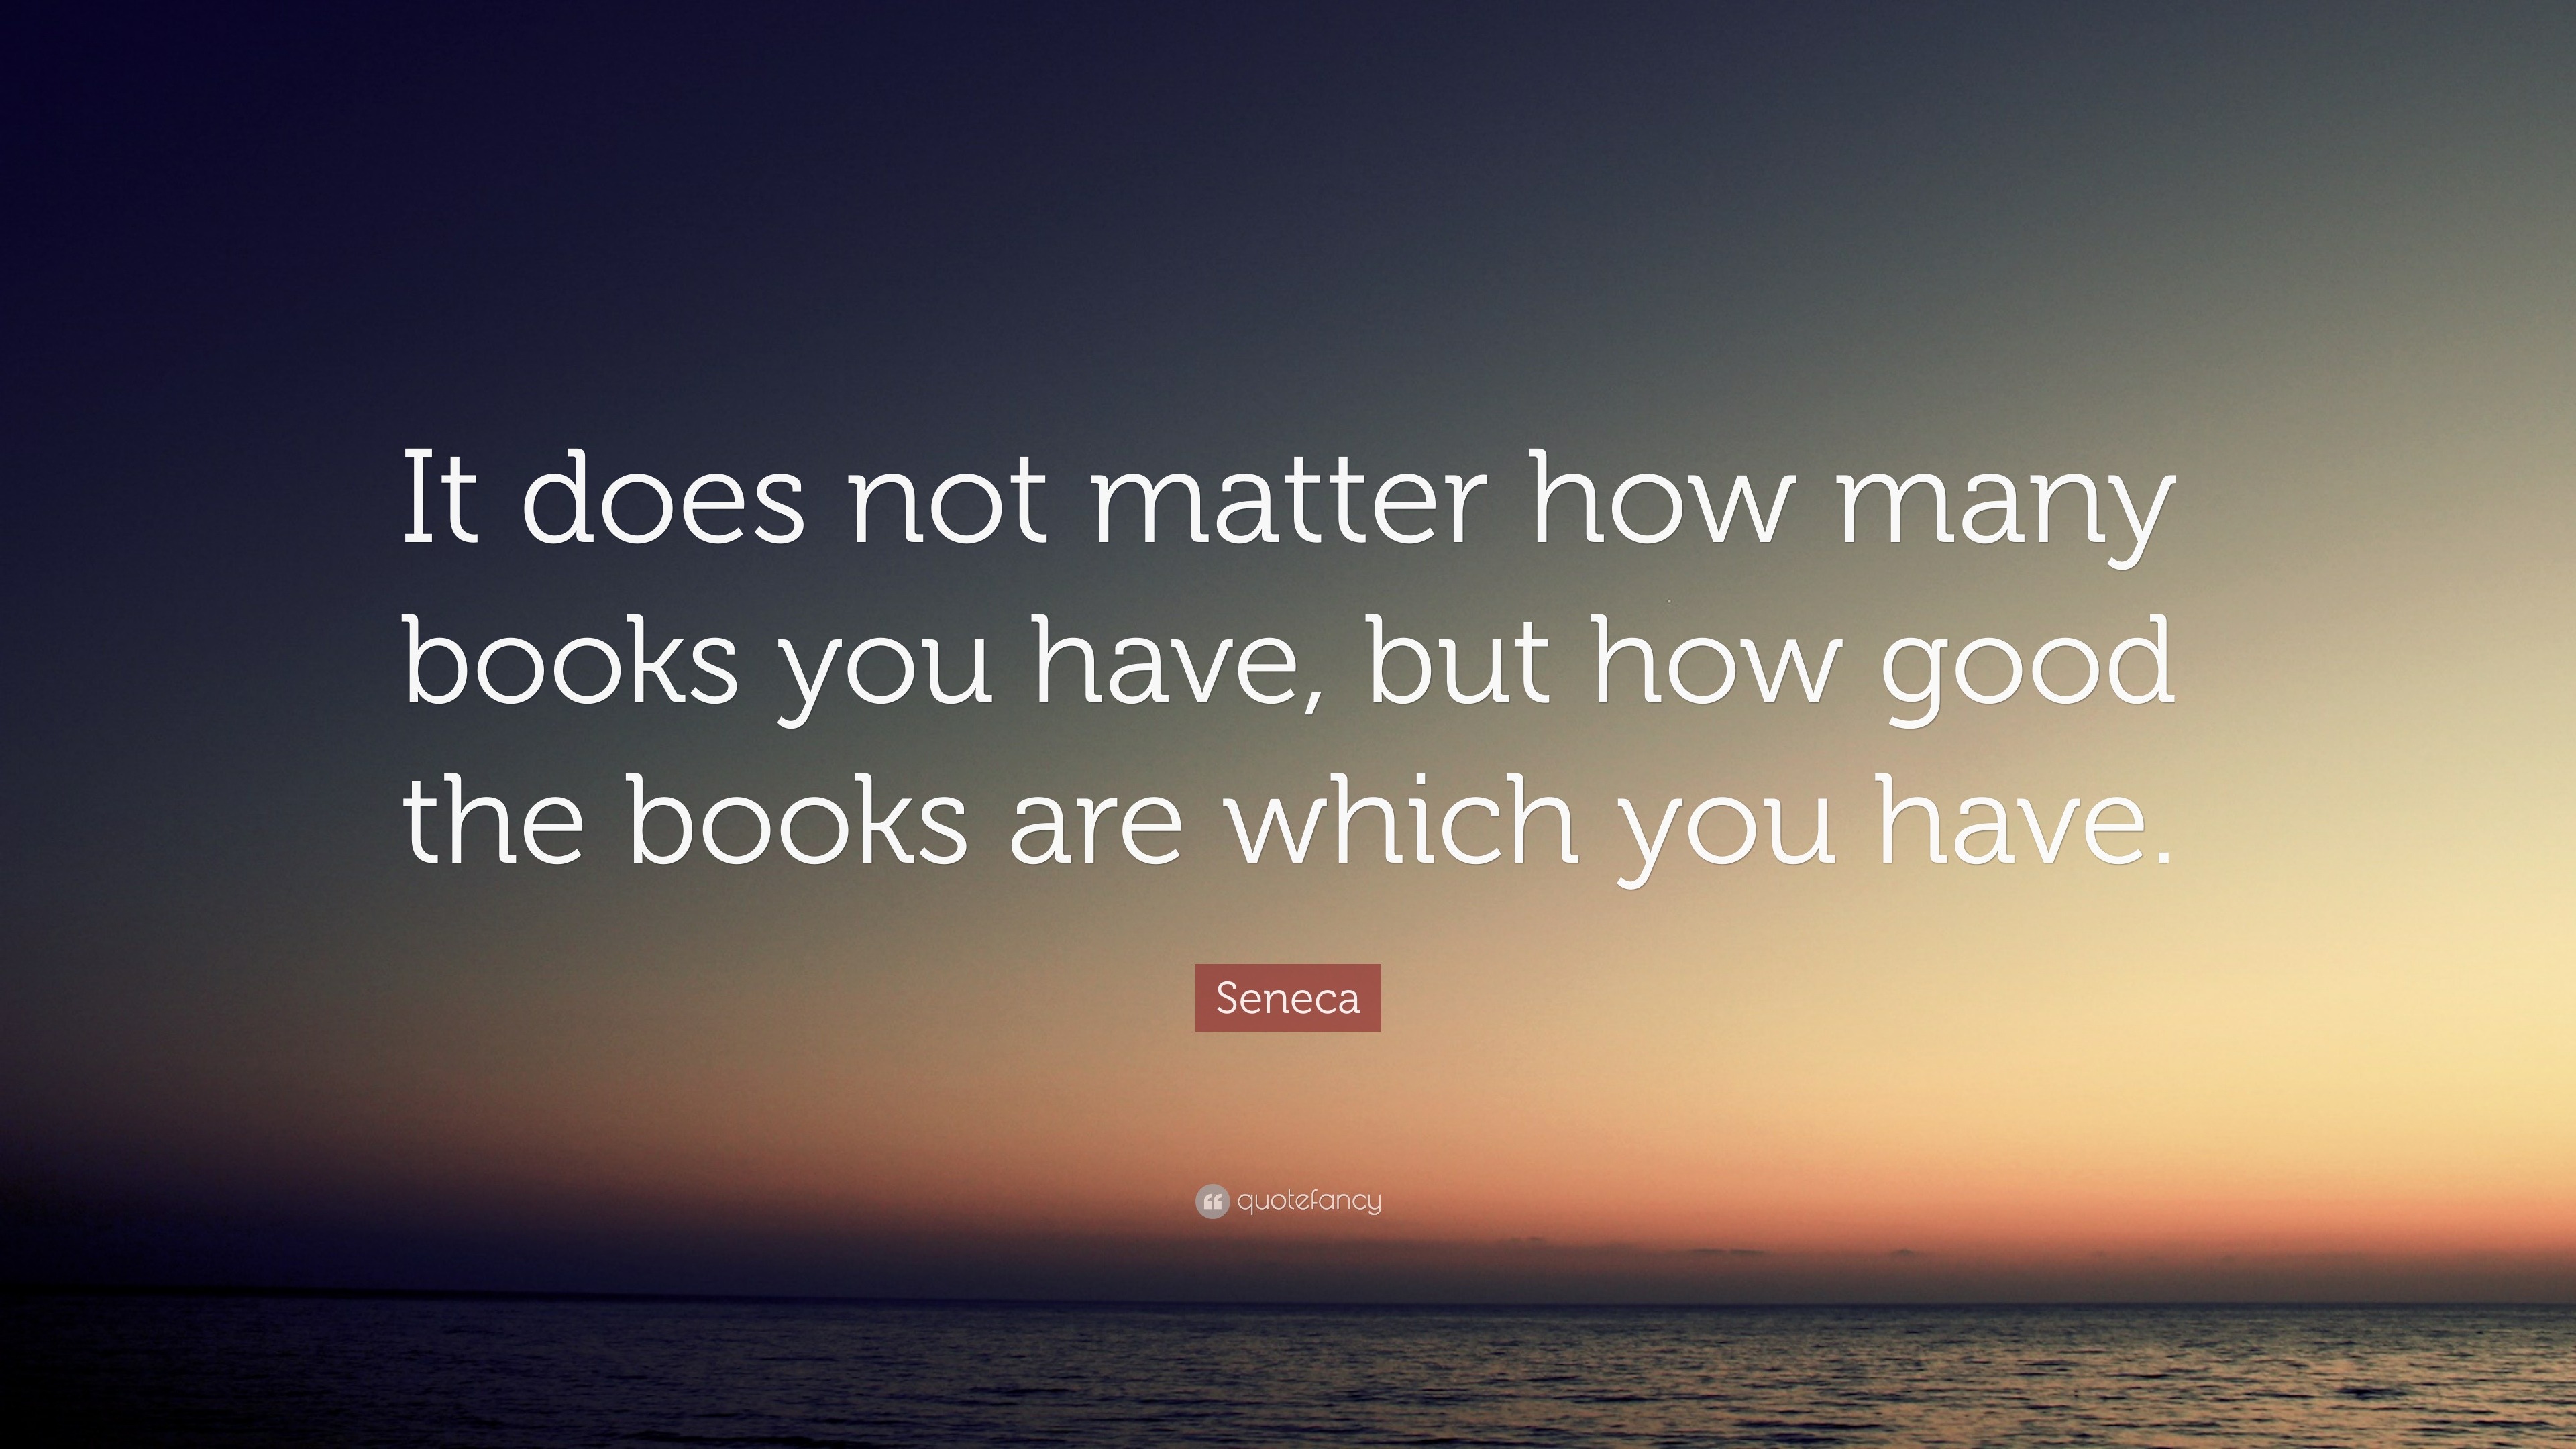 Seneca Quote: “It does not matter how many books you have, but how good ...